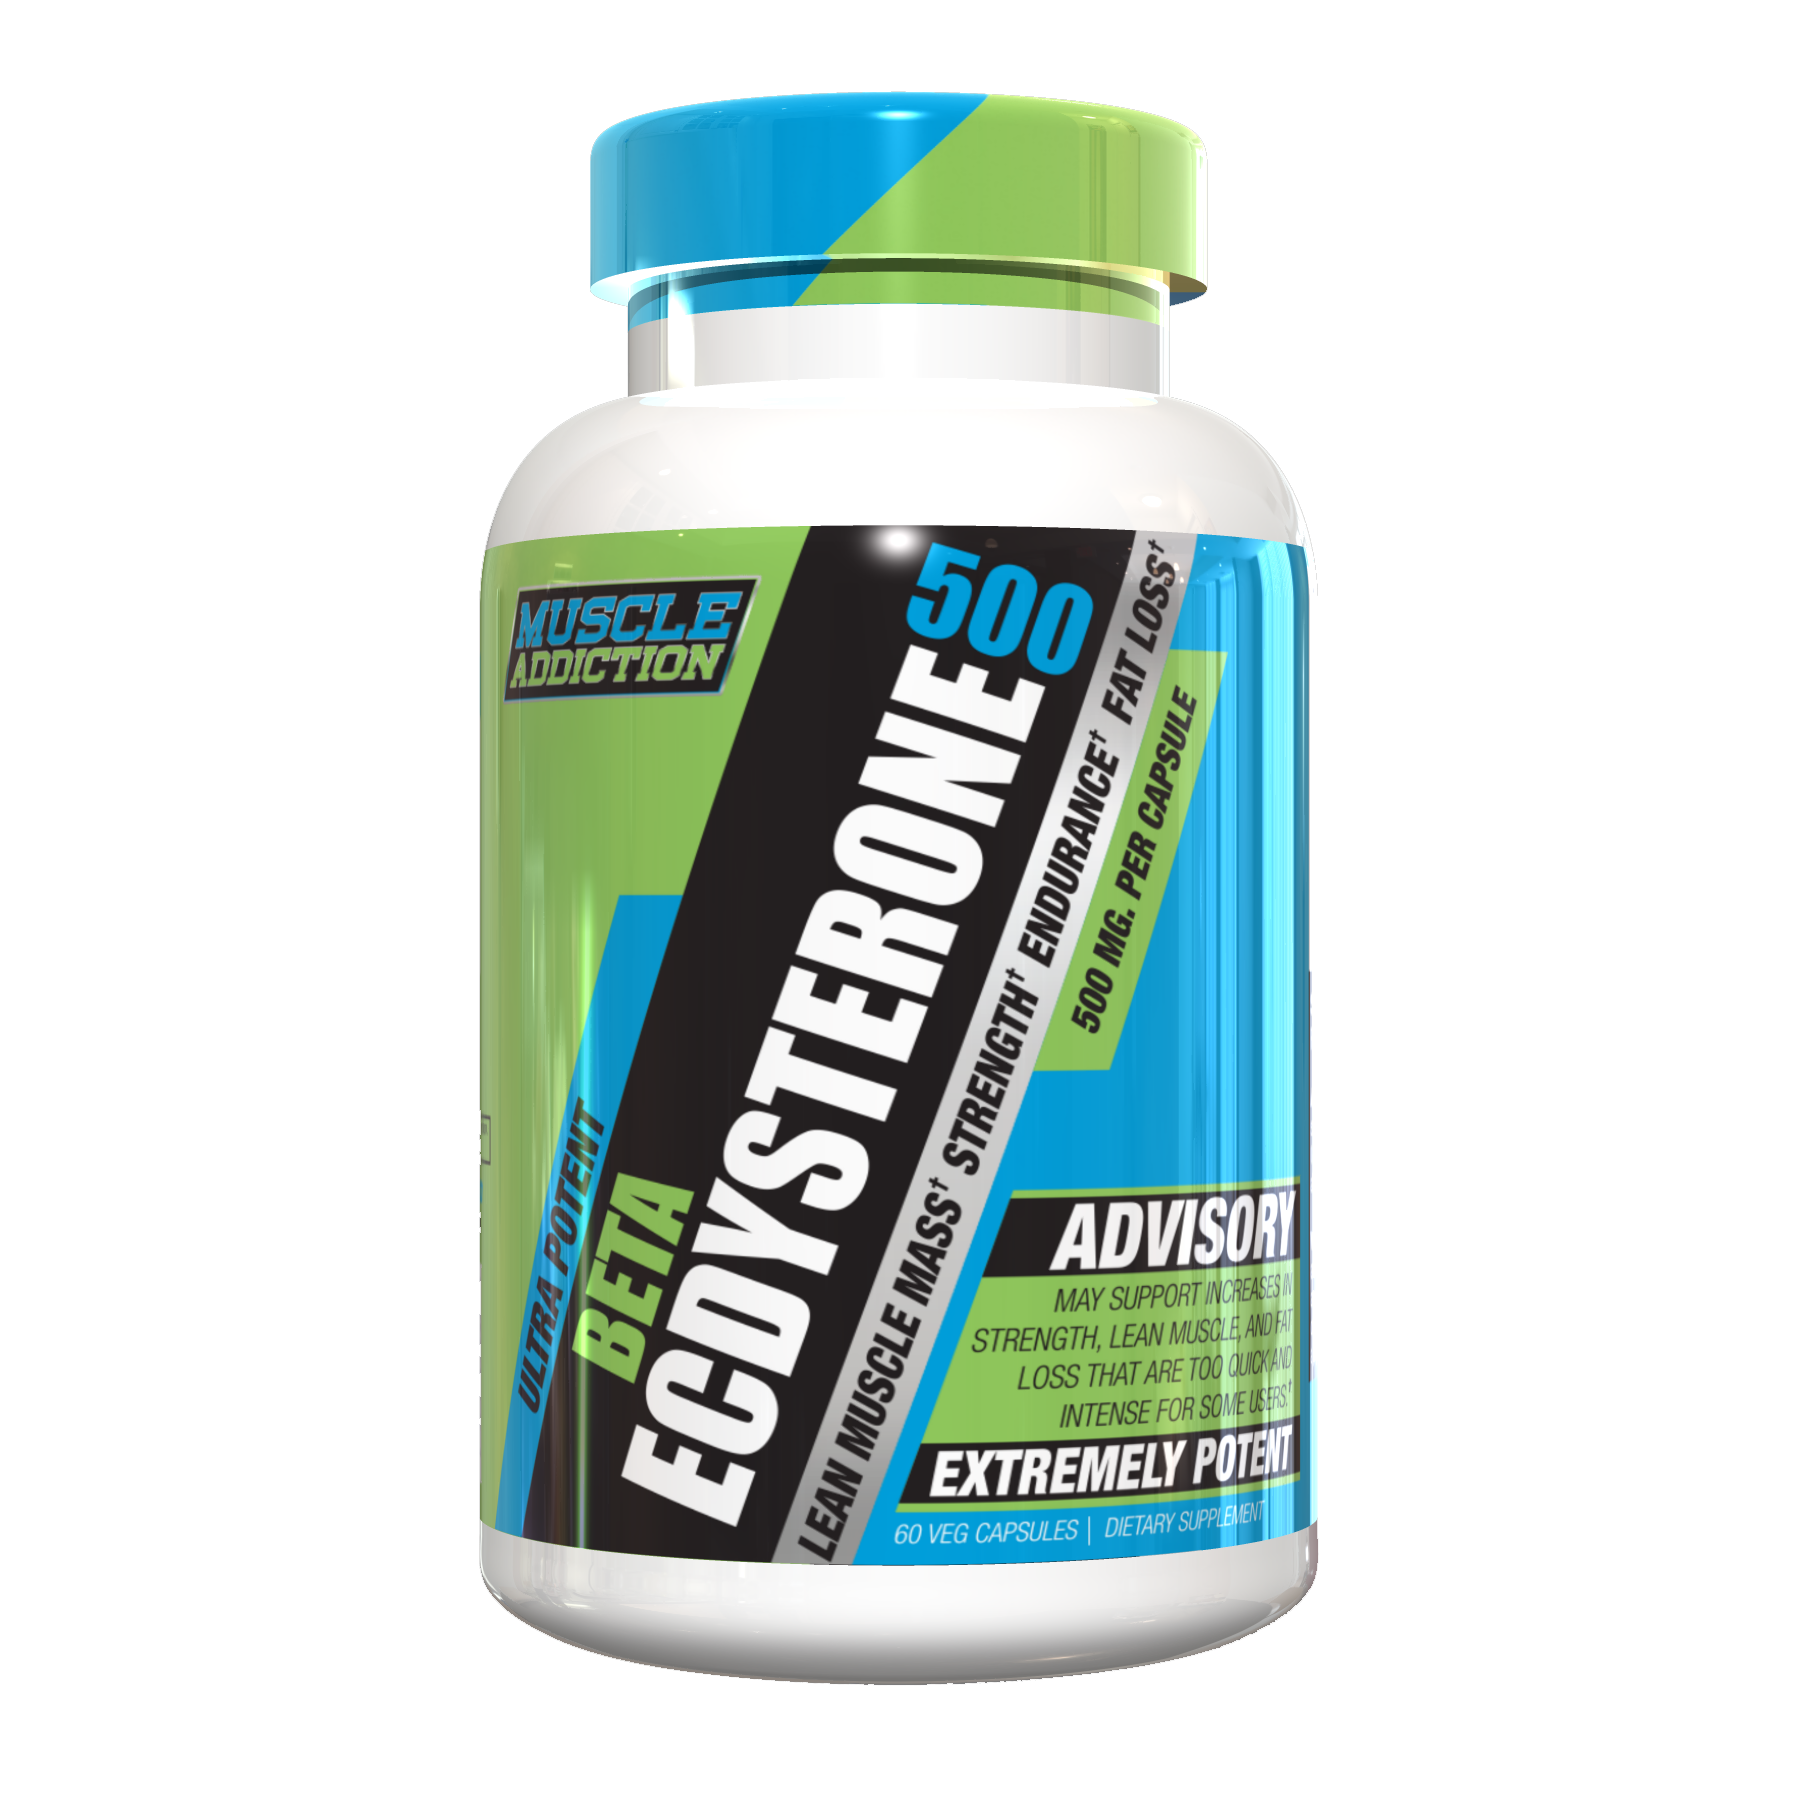 Muscle Addiction Beta Ecdysterone 500 - A1 Supplements Store